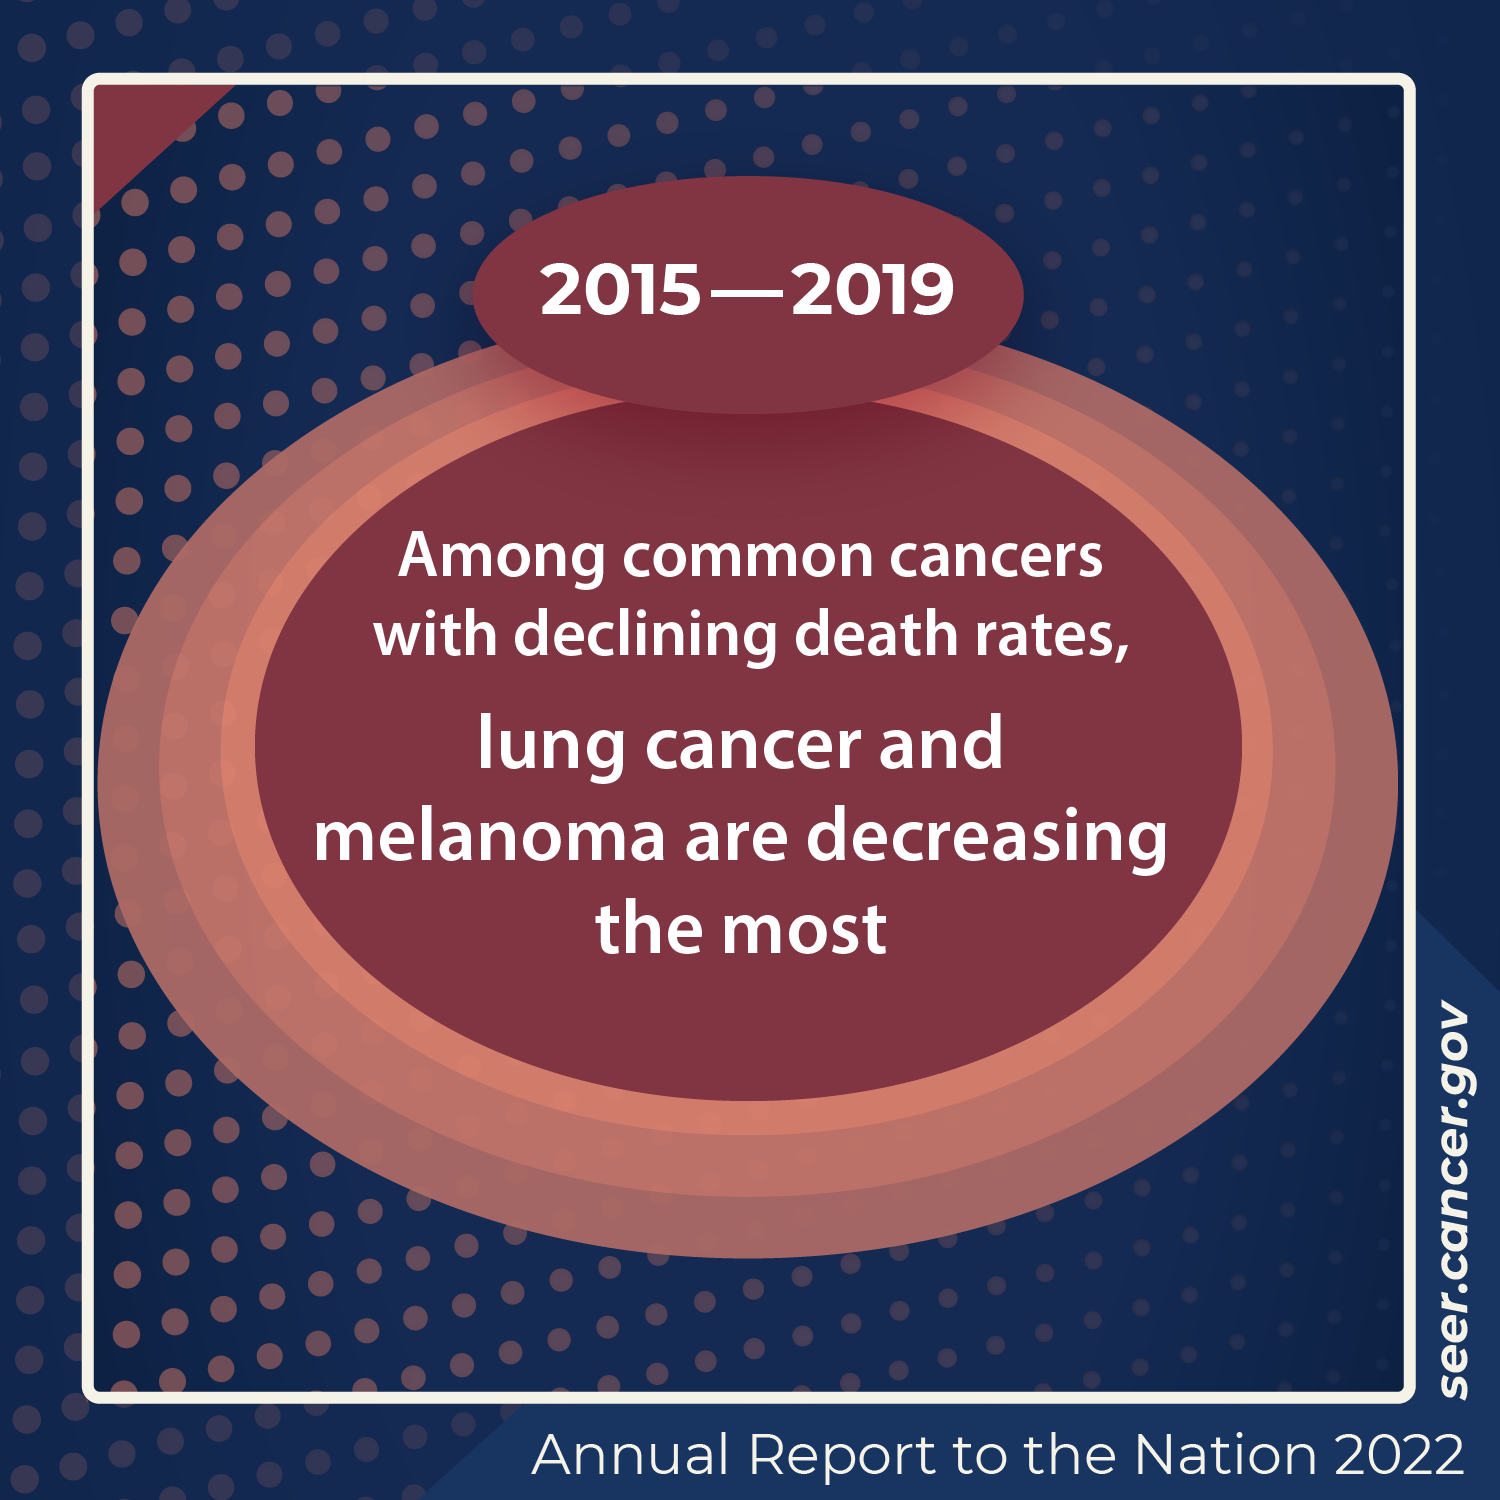 Among common cancers with declining death rates, lung cancer and melanoma are decreasing the most.